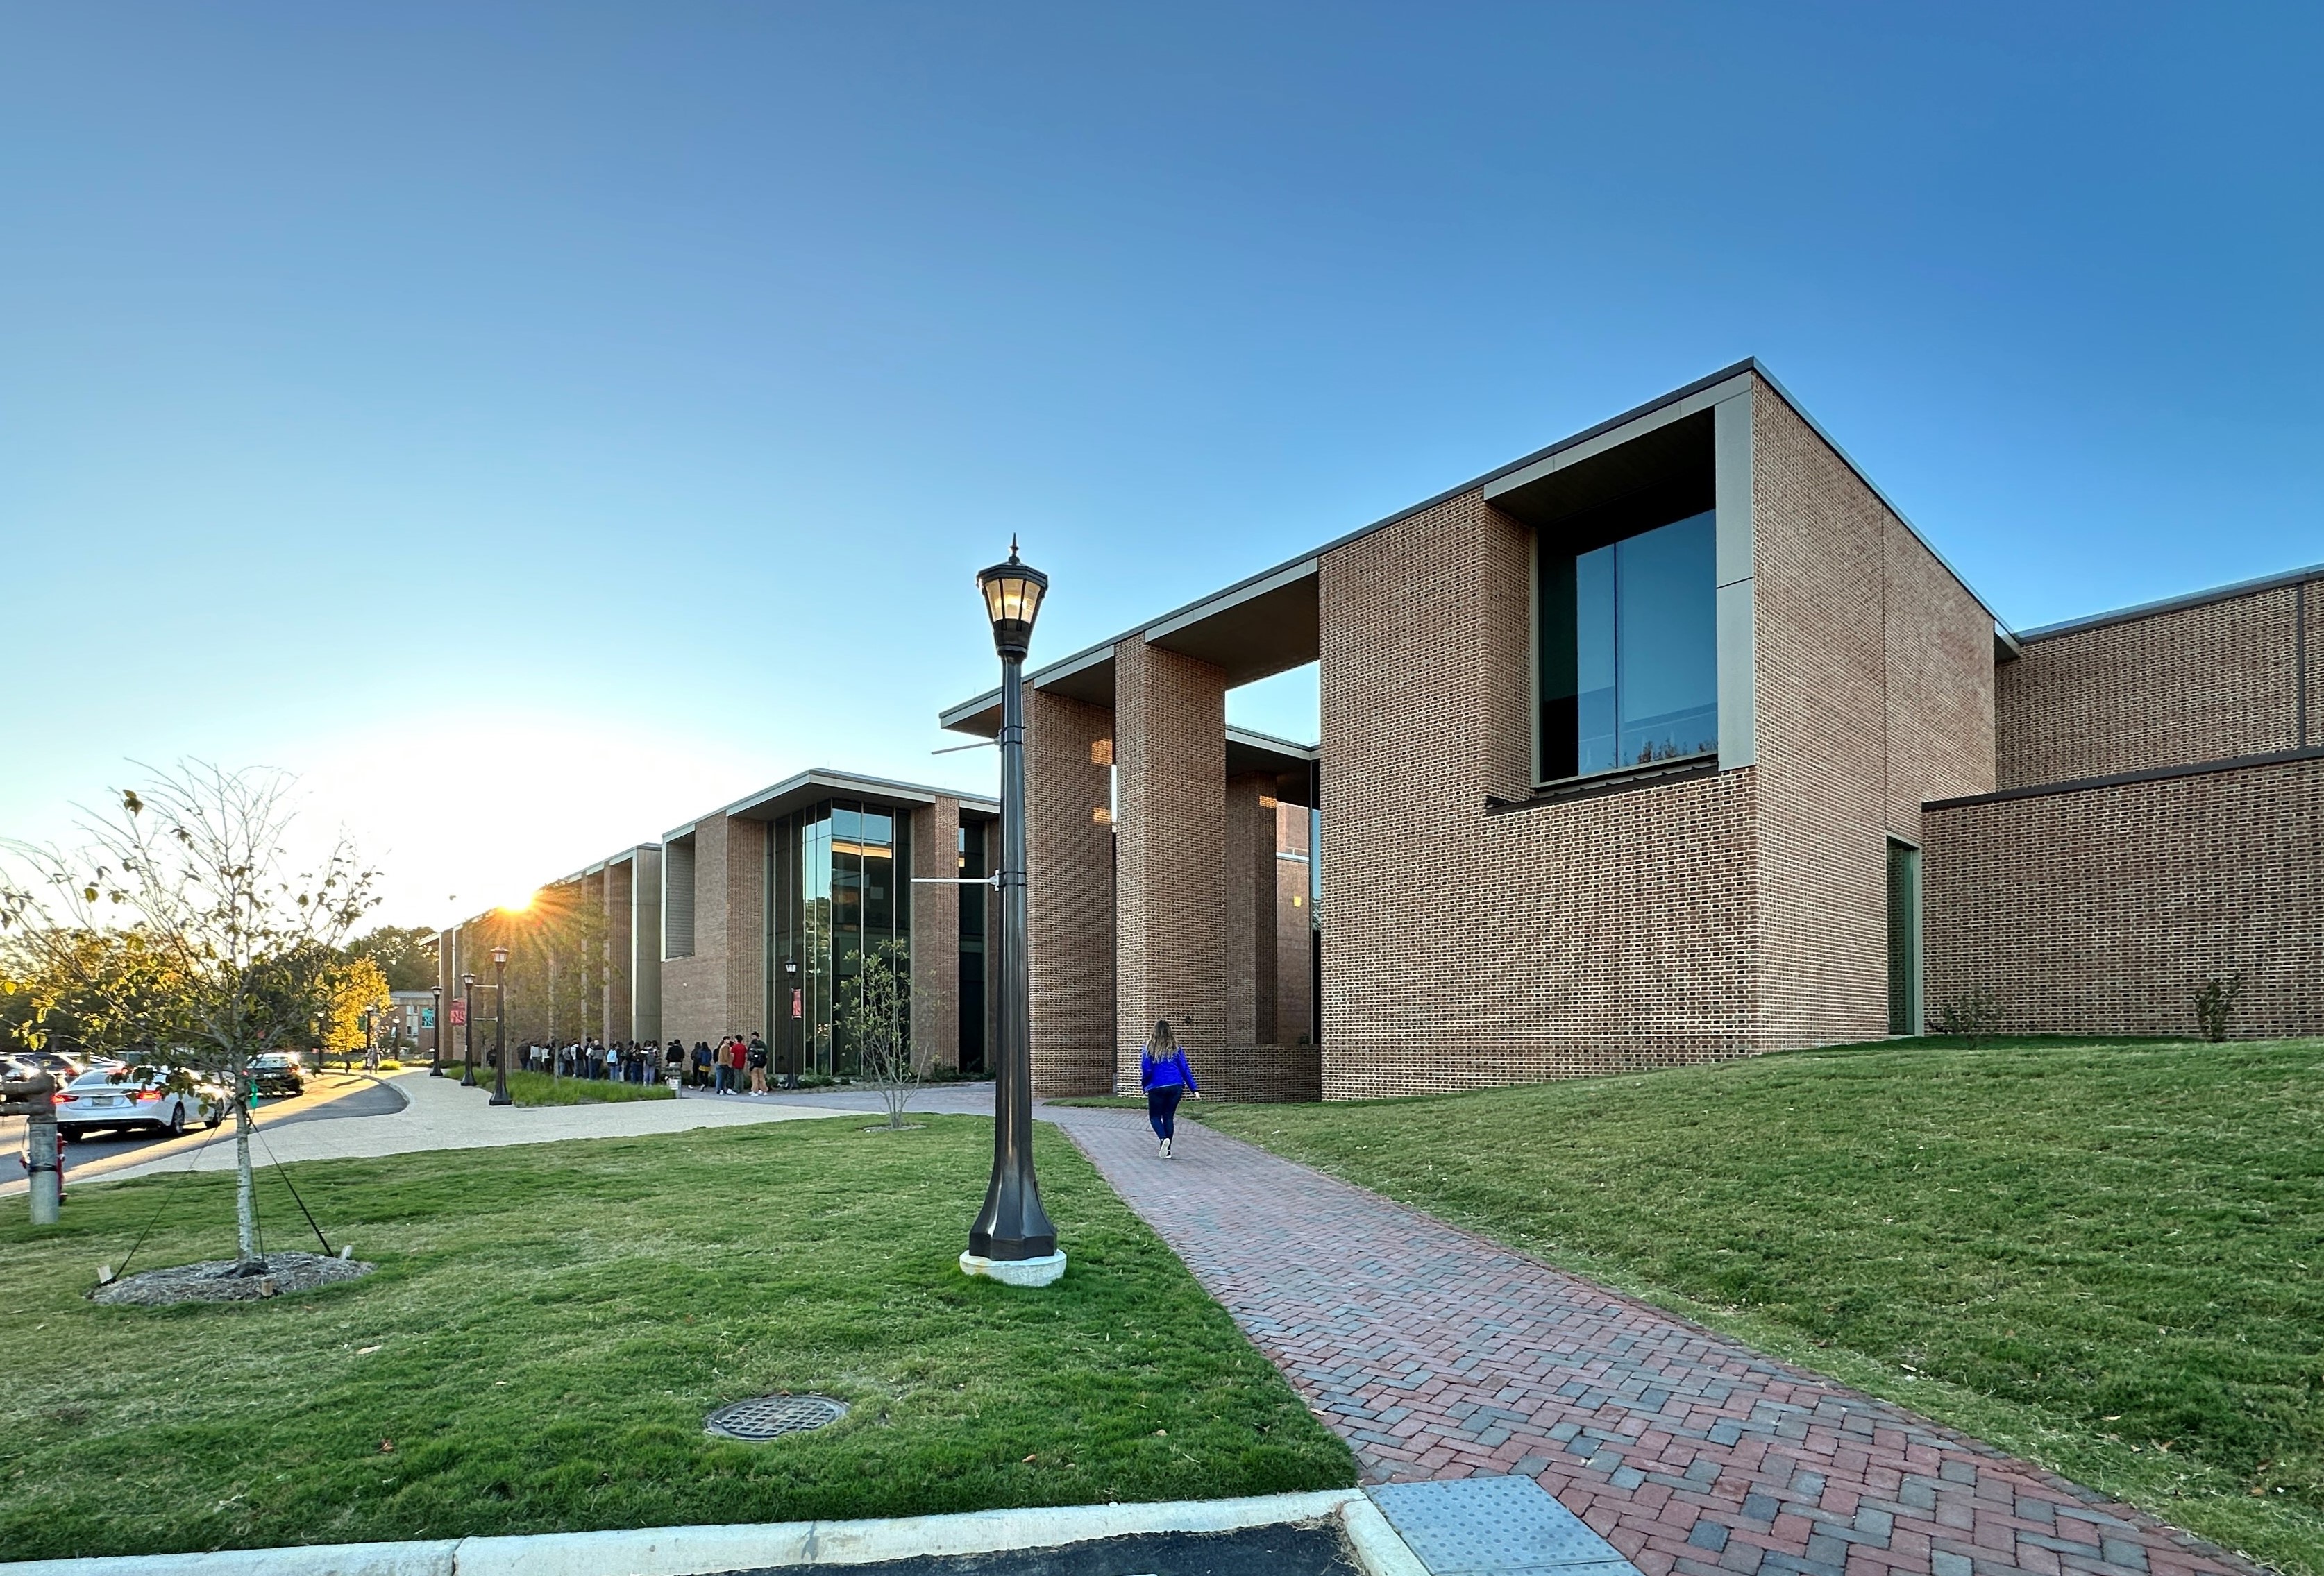 A woman in a blue shirt walks along a path in front of a brick and glass college performing arts center.